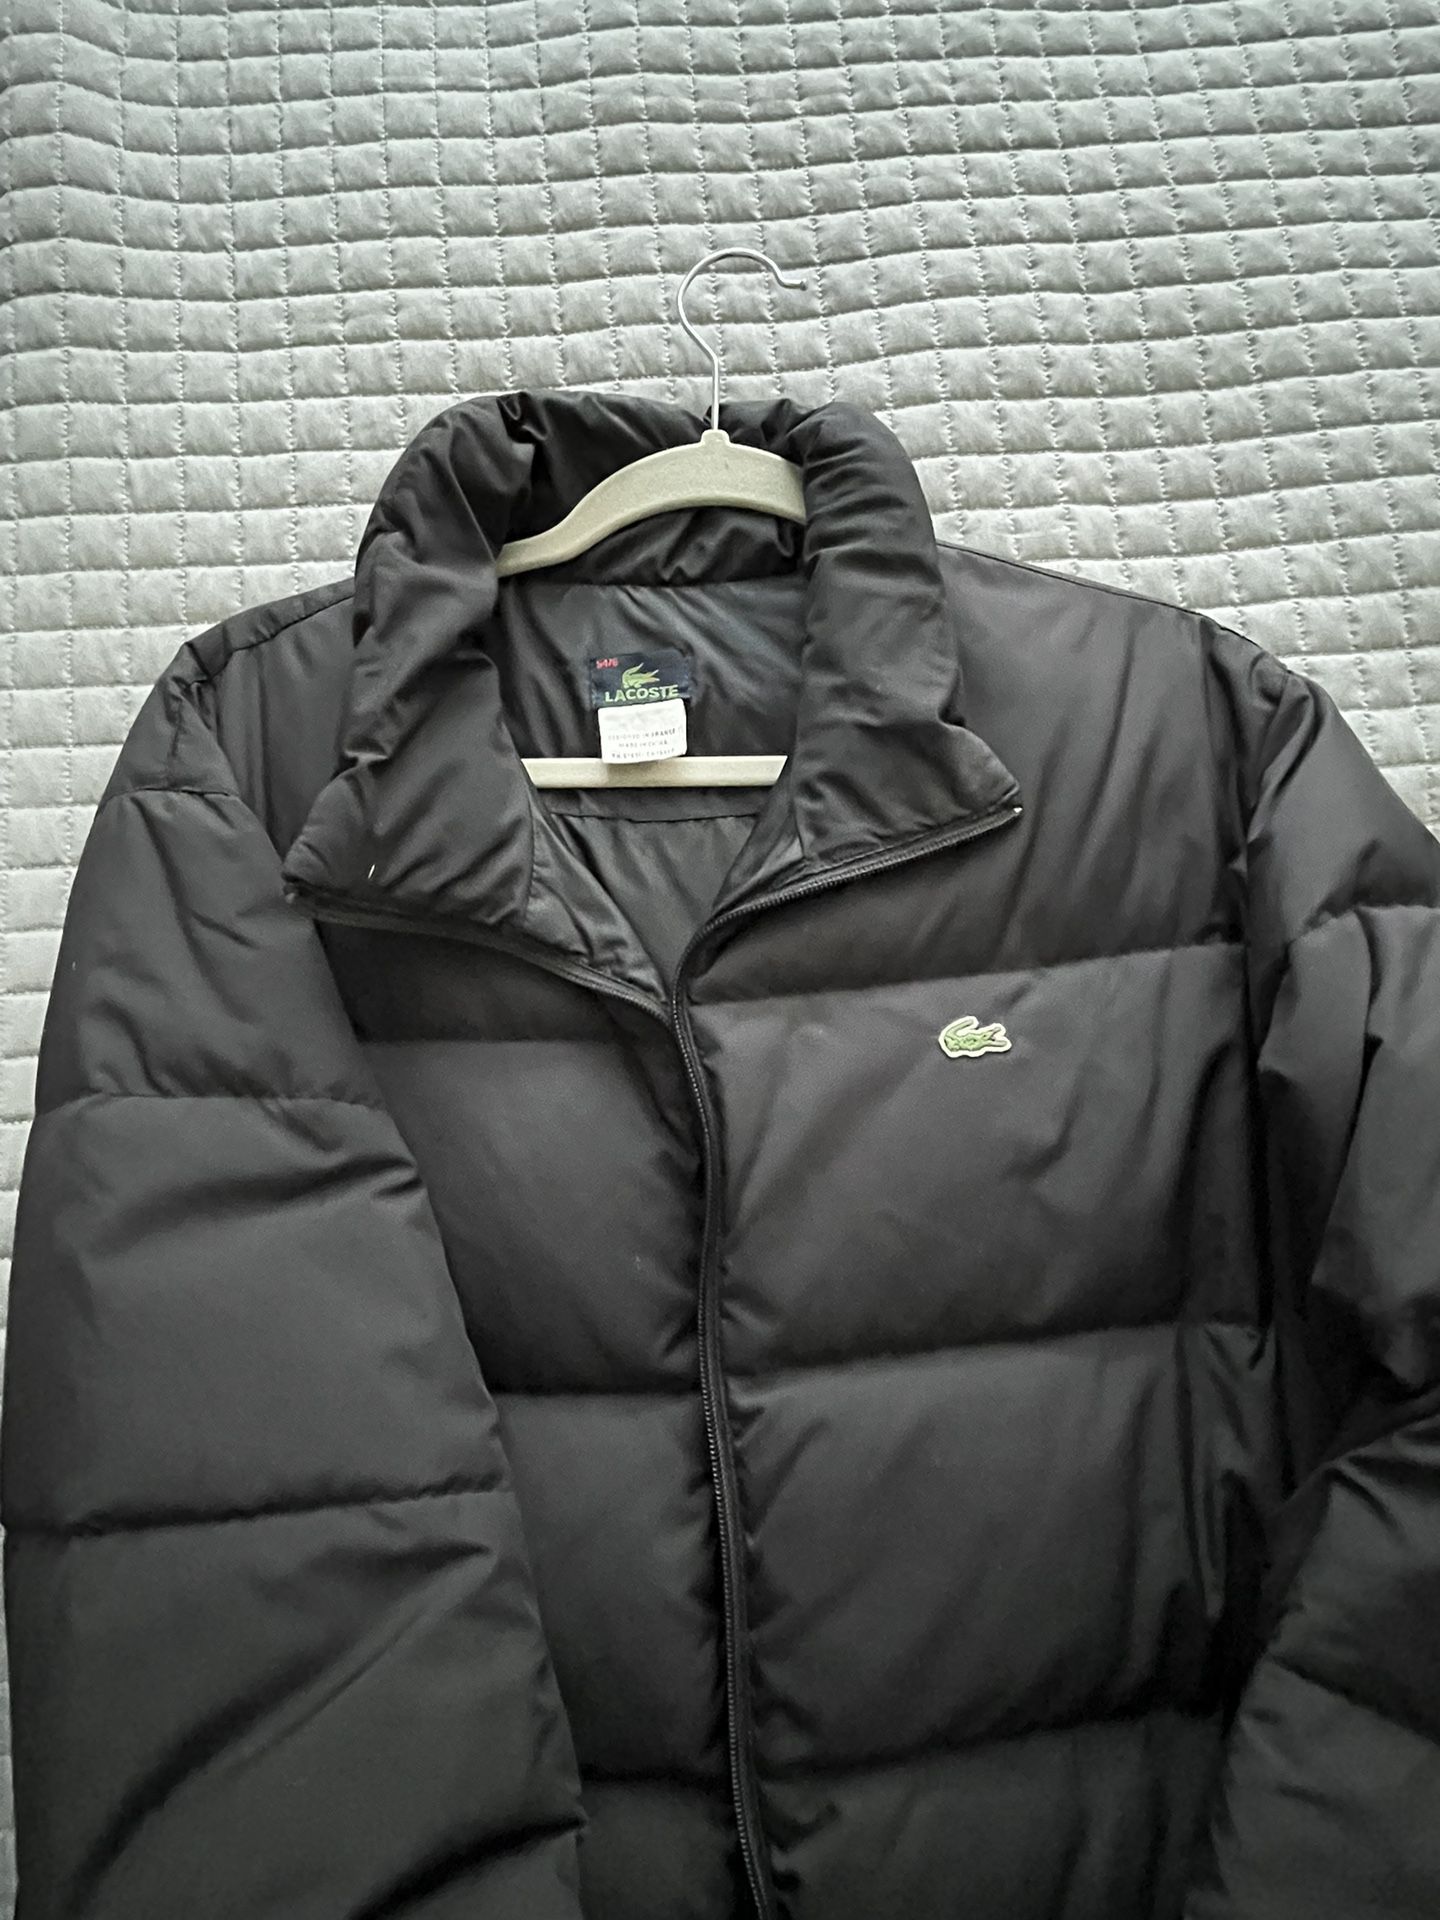 Lacoste Men's Down Jacket - Black for in York, NY - OfferUp